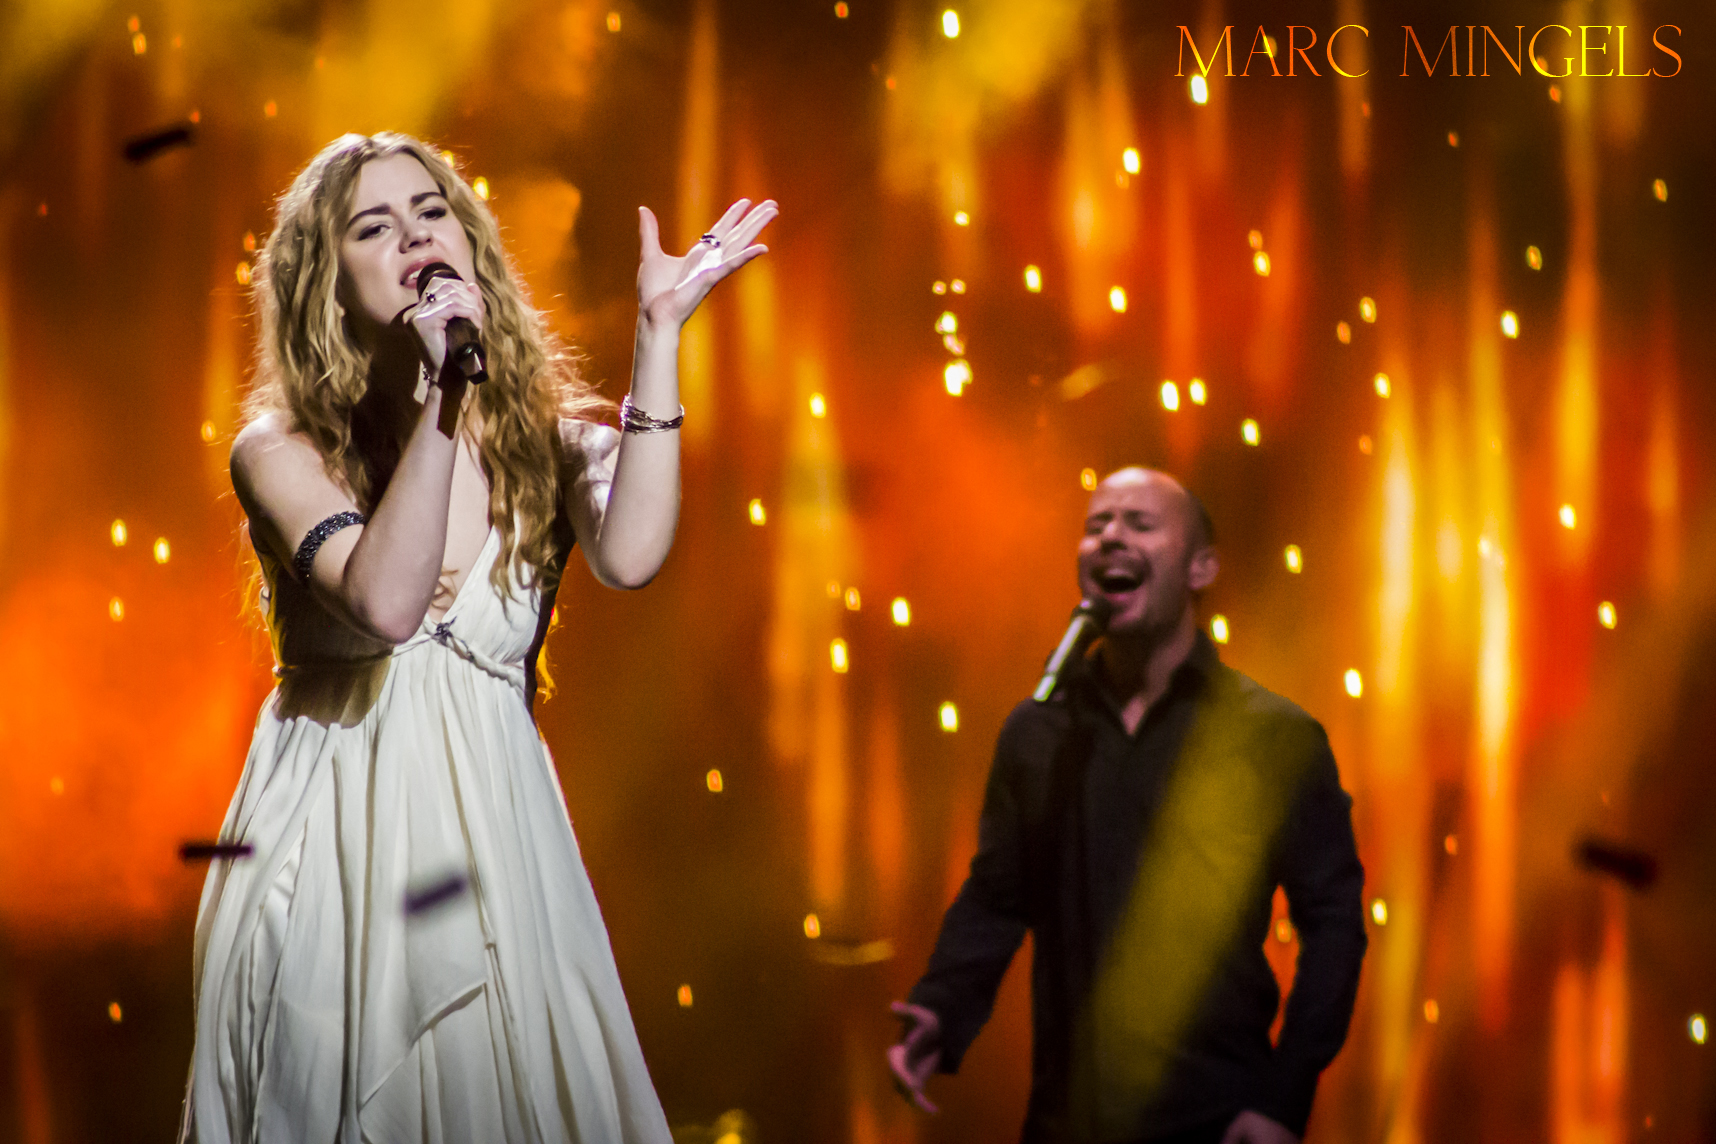 Eurovision 2014 Grand Final on May 10th!